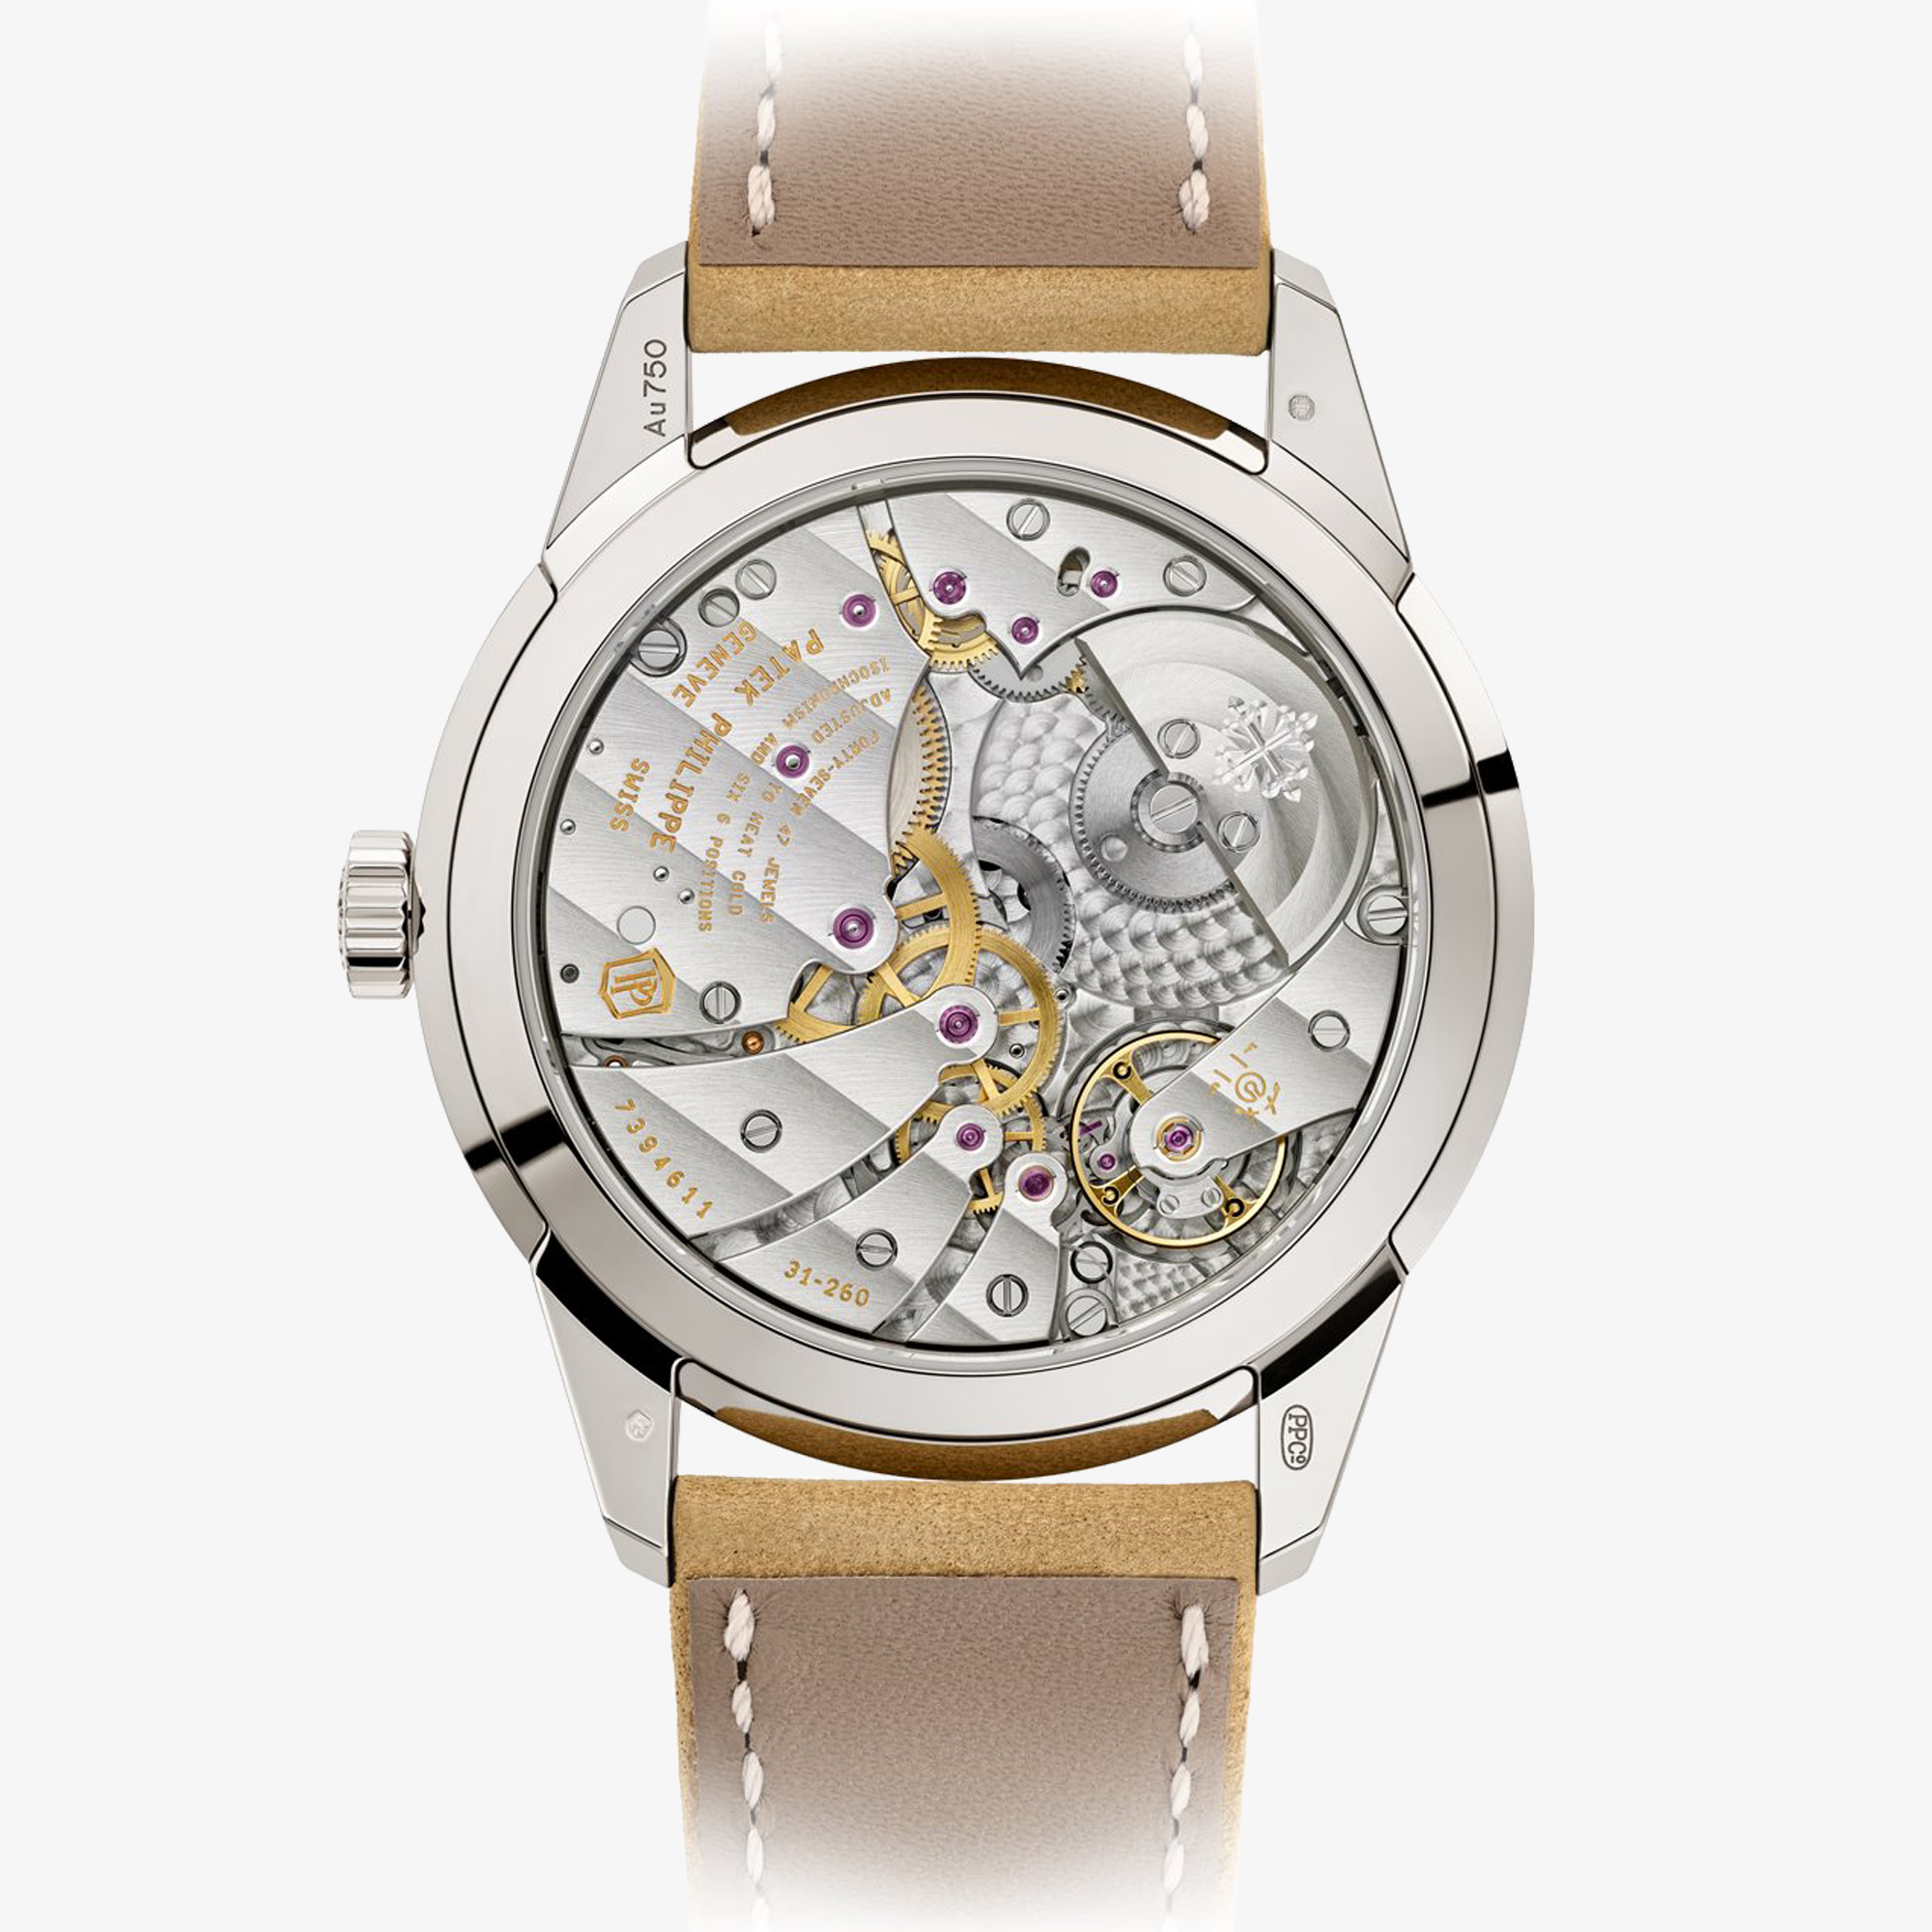 PATEK PHILLIPPE ANNUAL CALENDAR AND TRAVEL TIME